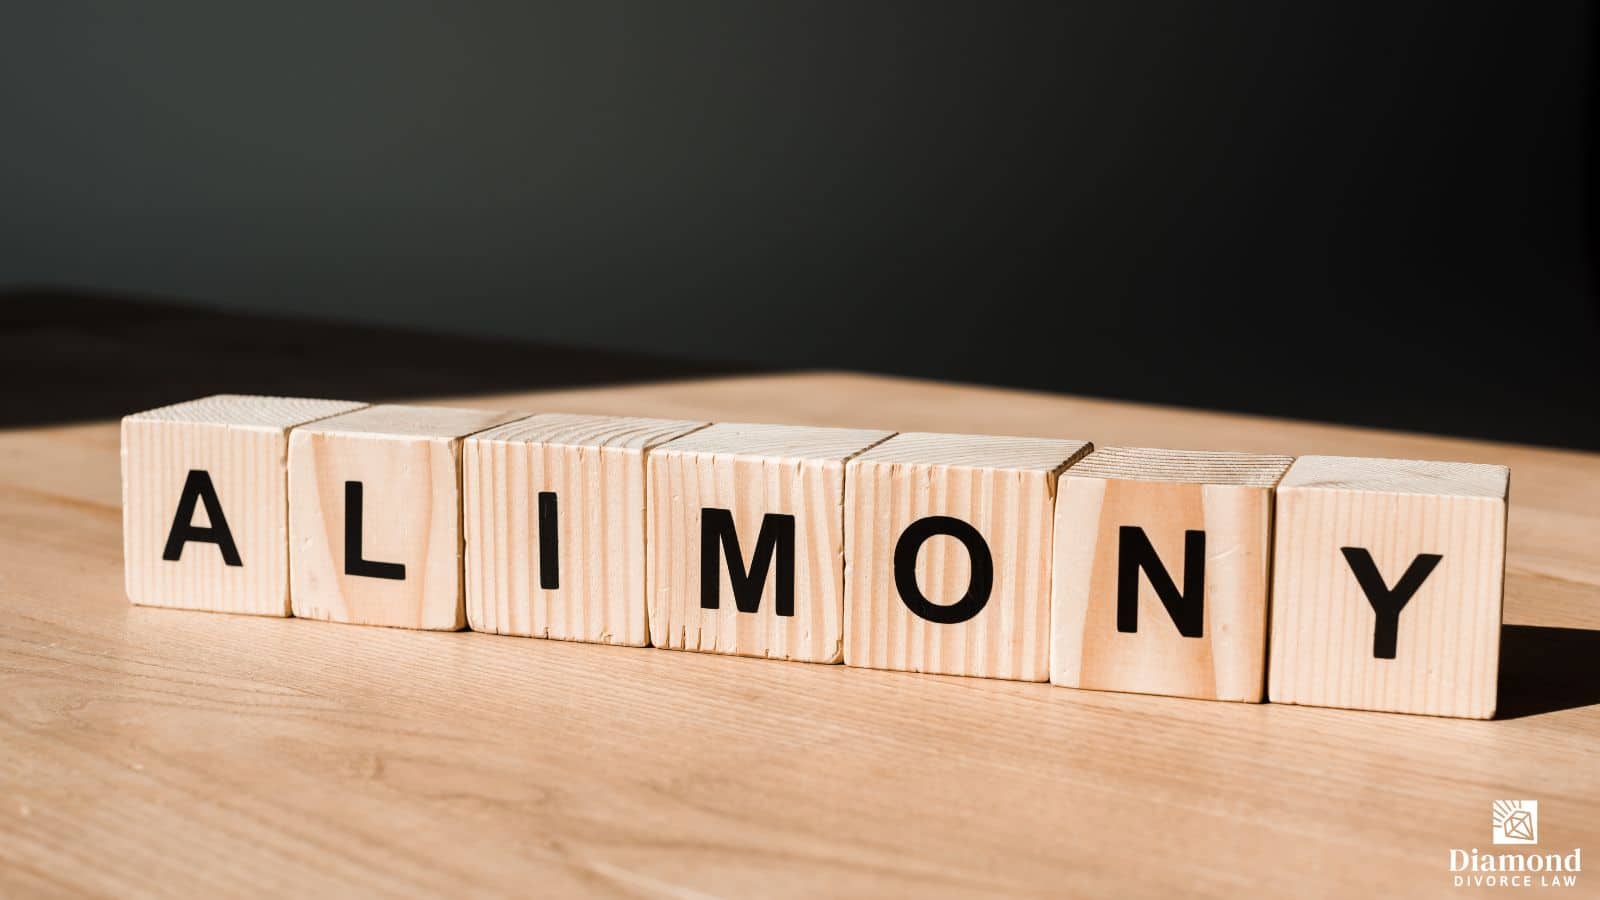 Wooden blocks on a table spelling out the word "alimony".